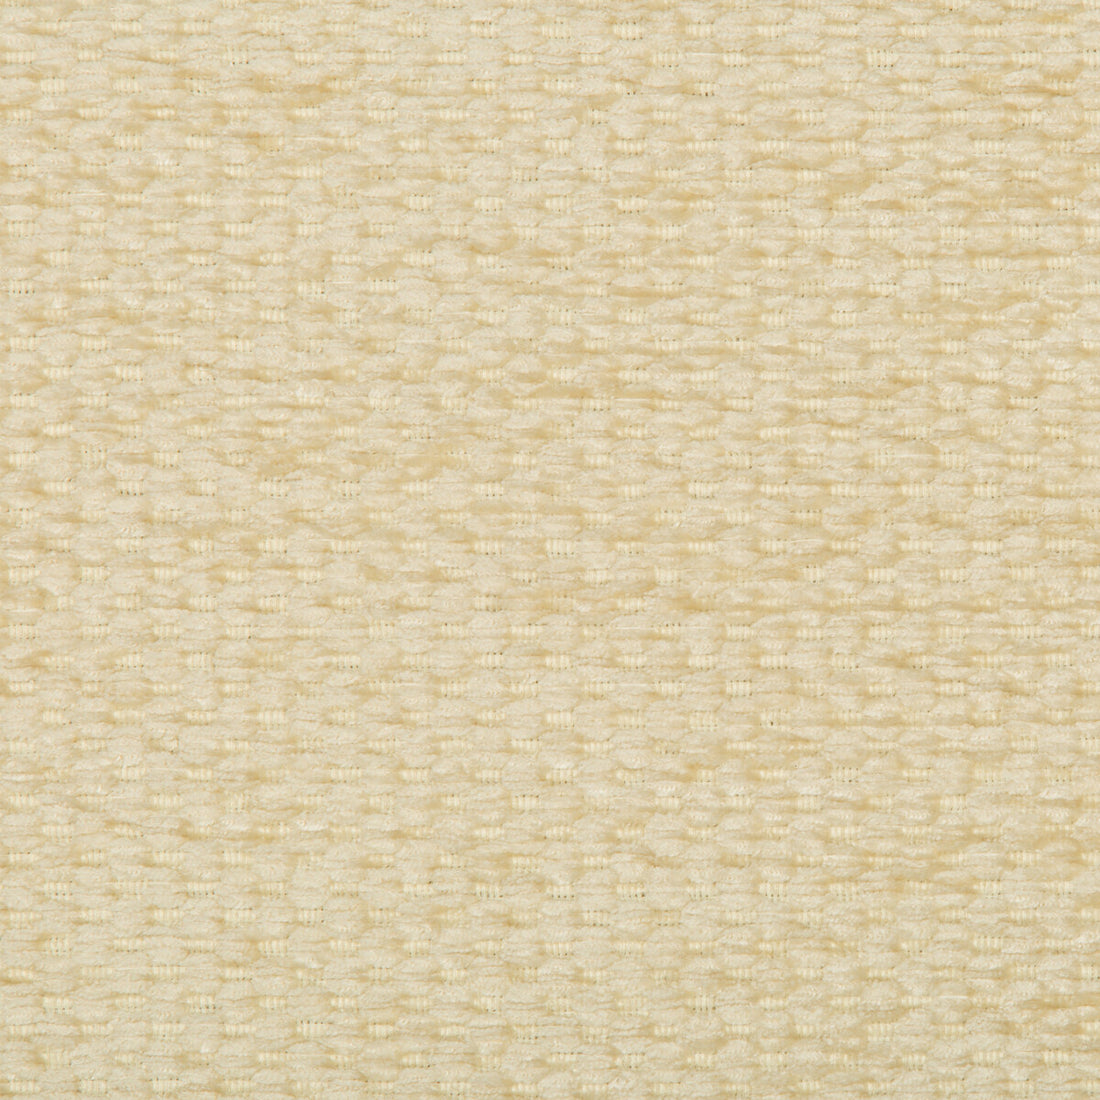 Kravet Design fabric in 35133-116 color - pattern 35133.116.0 - by Kravet Design in the Performance Crypton Home collection